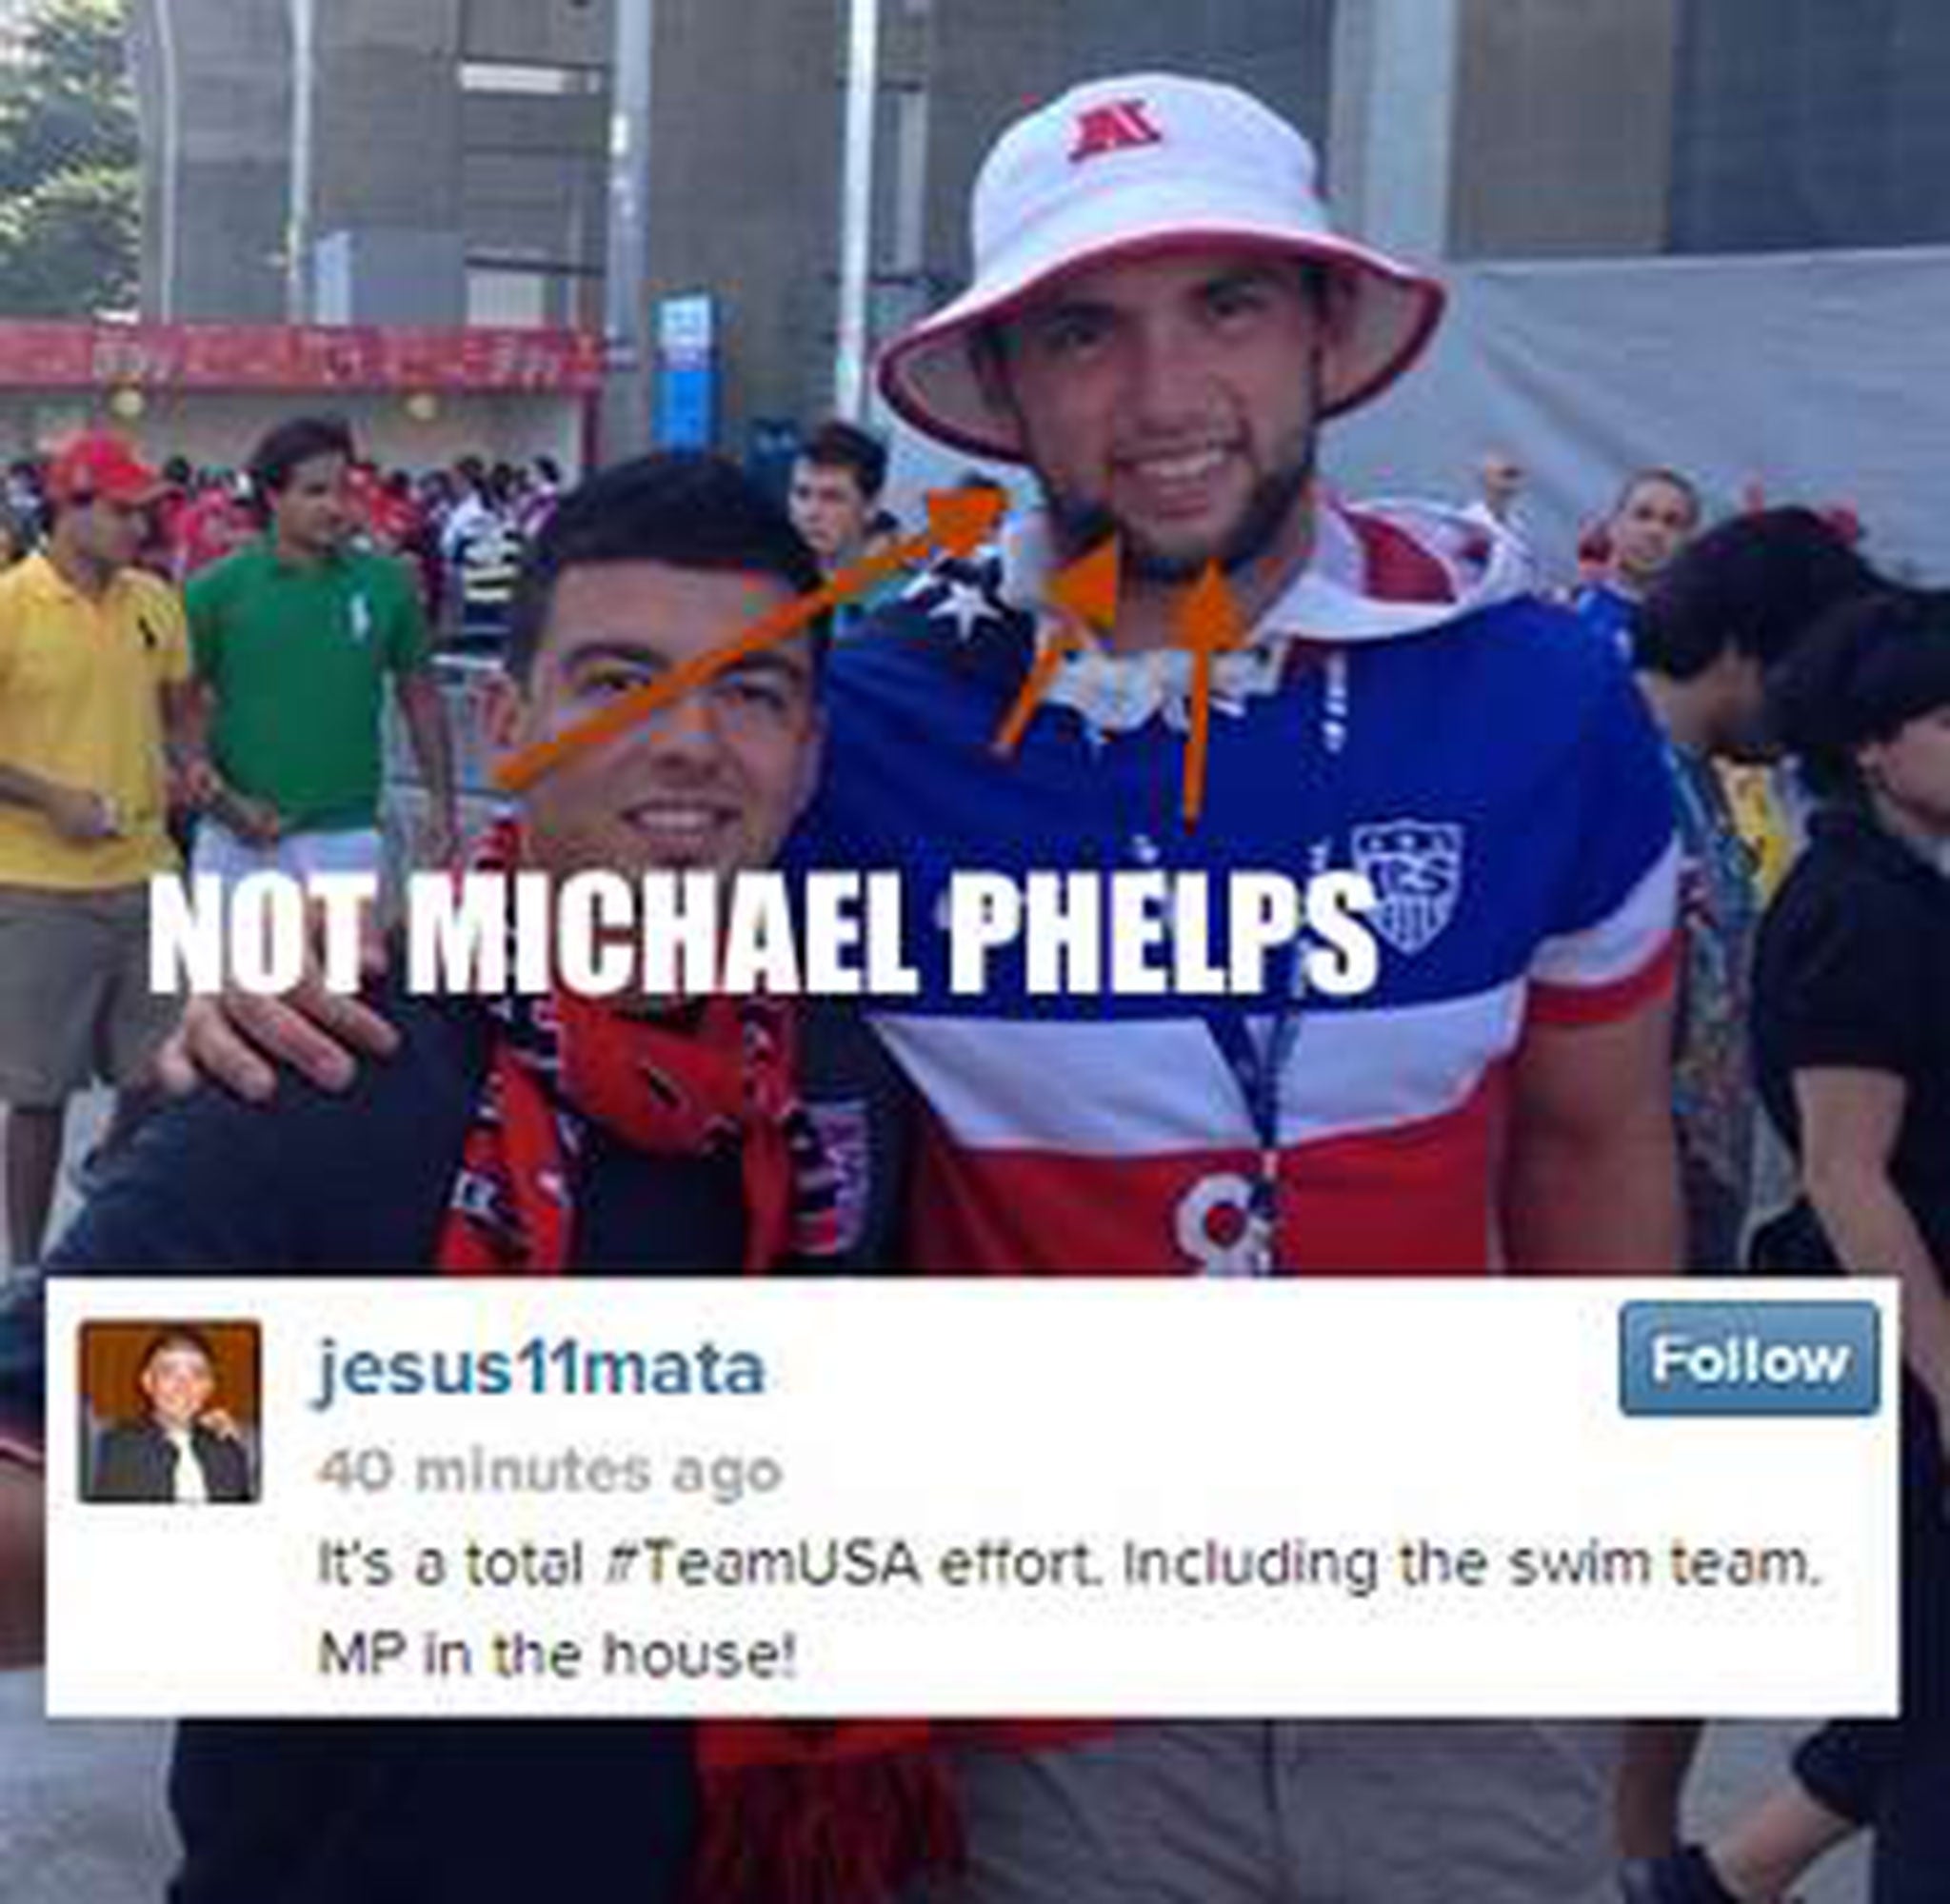 A fan mistakes Indianapolis Colts quarter-back Andrew Luck for Olympic swimmer Michael Phelps